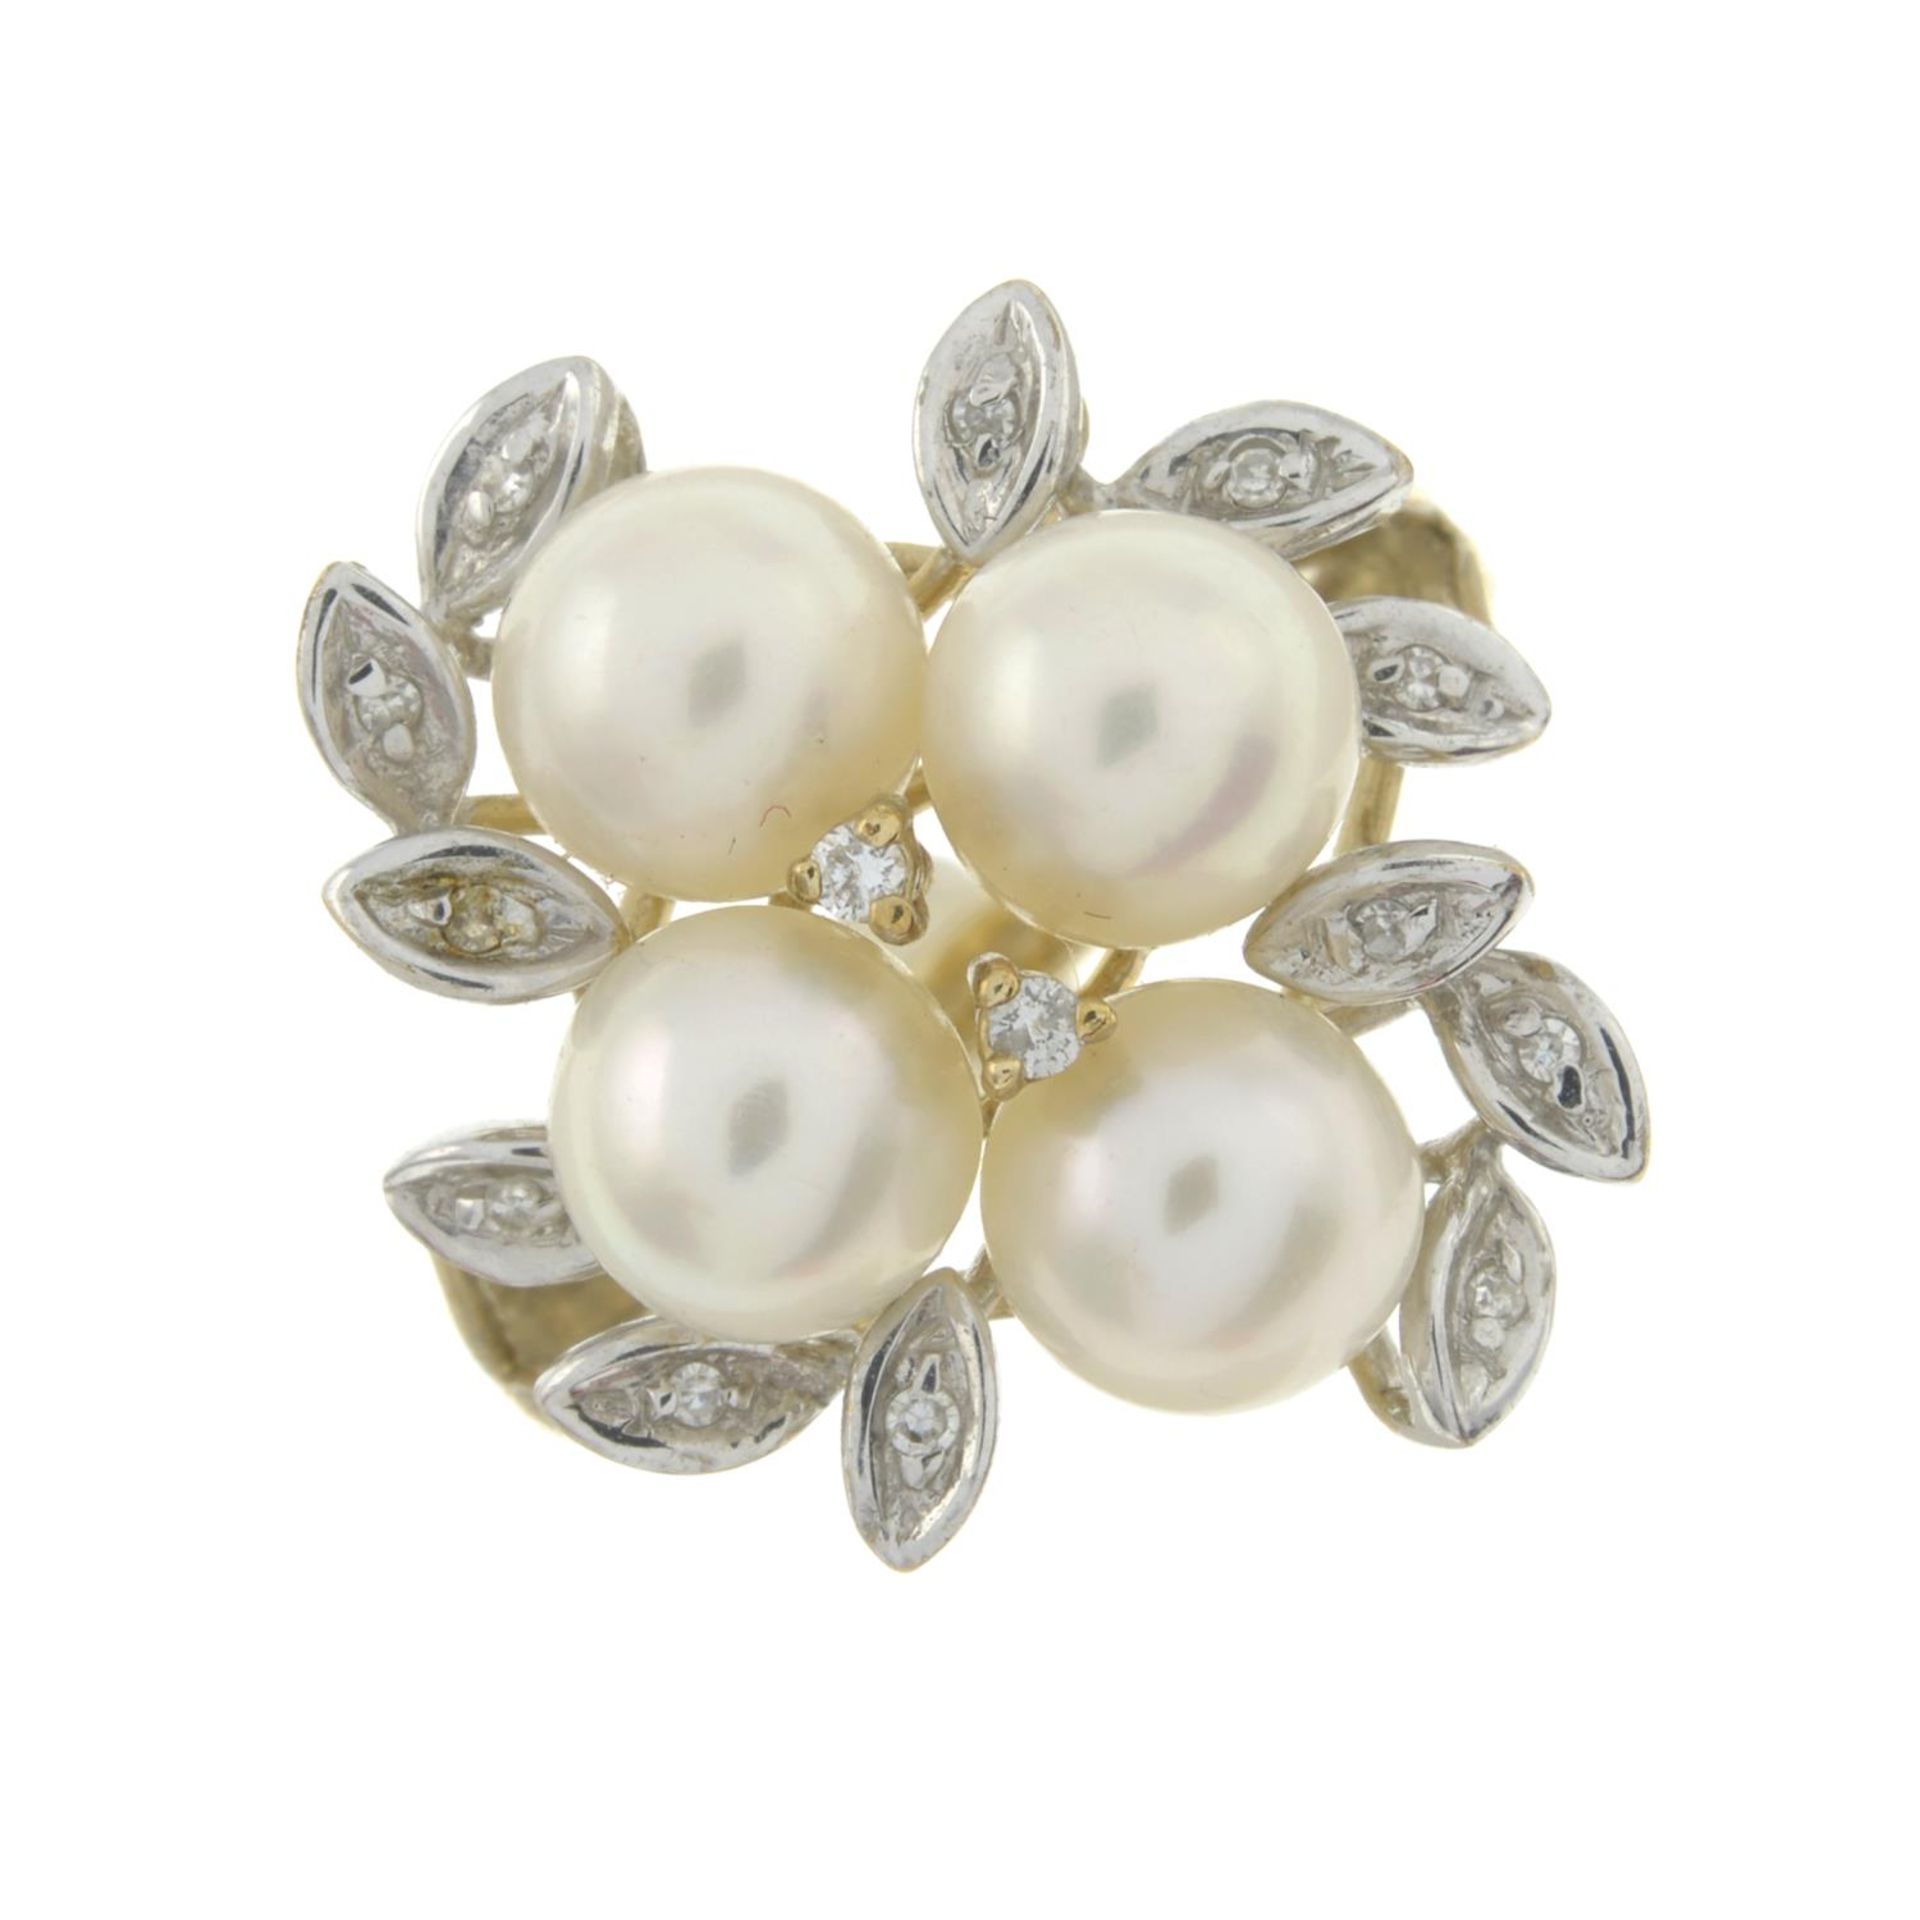 A 9ct gold cultured pearl and diamond floral dress ring.Hallmarks for 9ct gold.